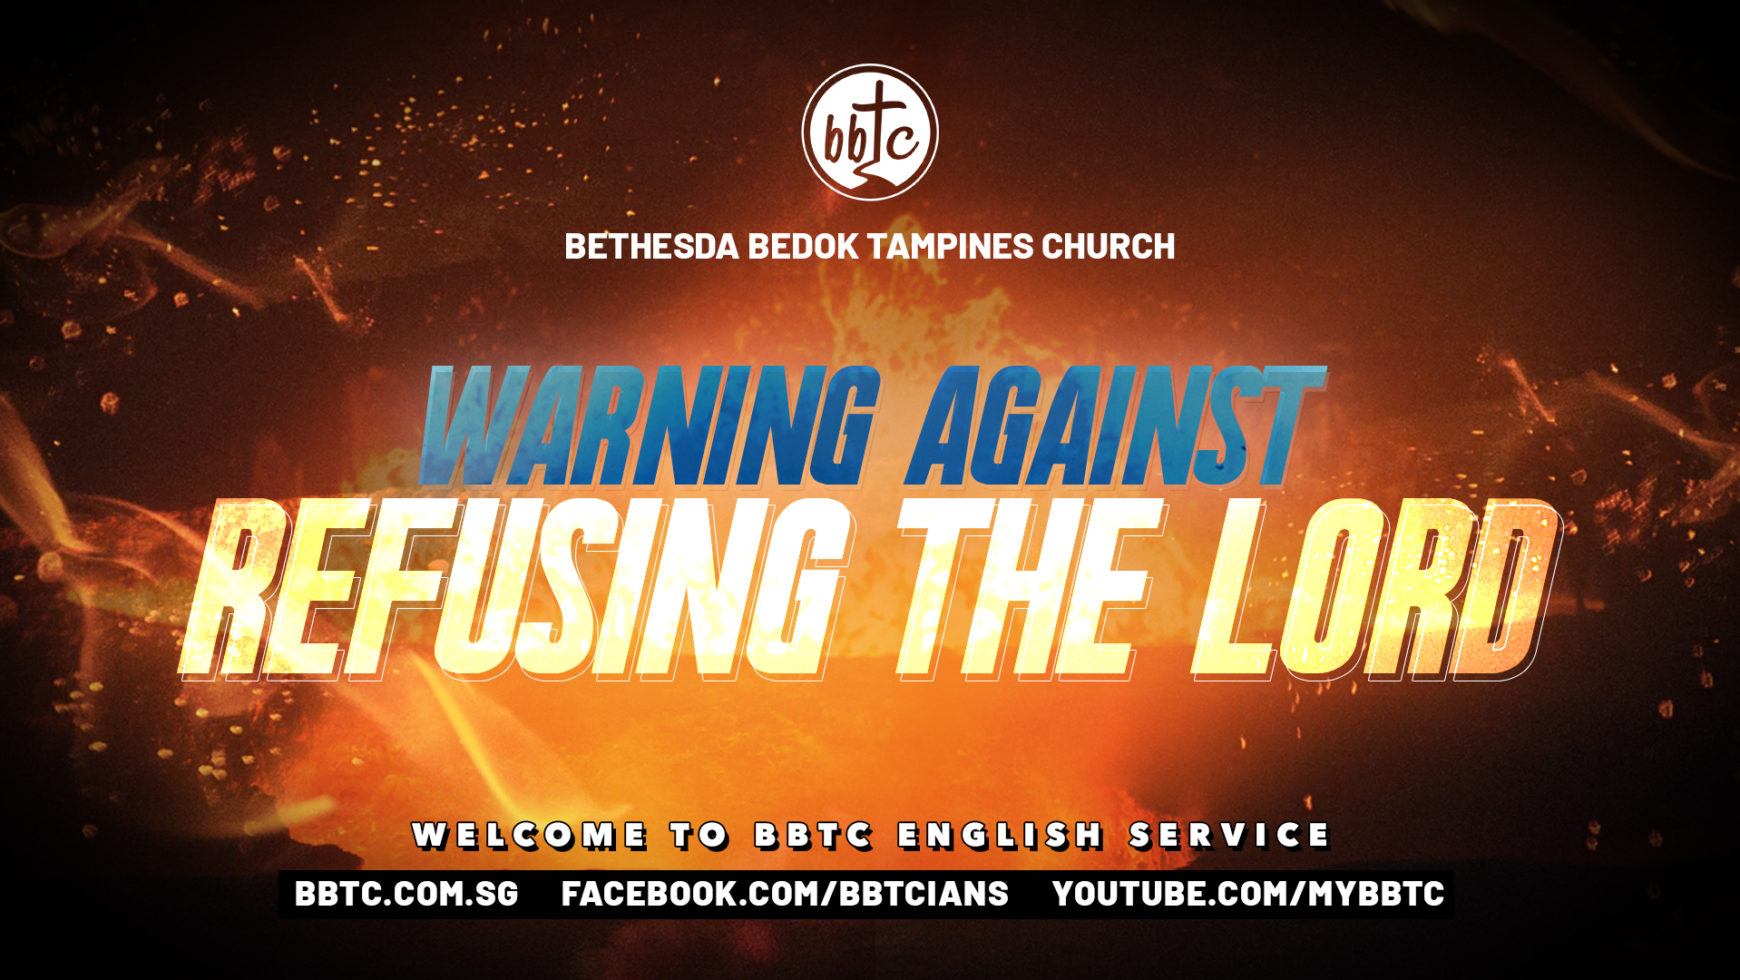 WARNING AGAINST REFUSING THE LORD